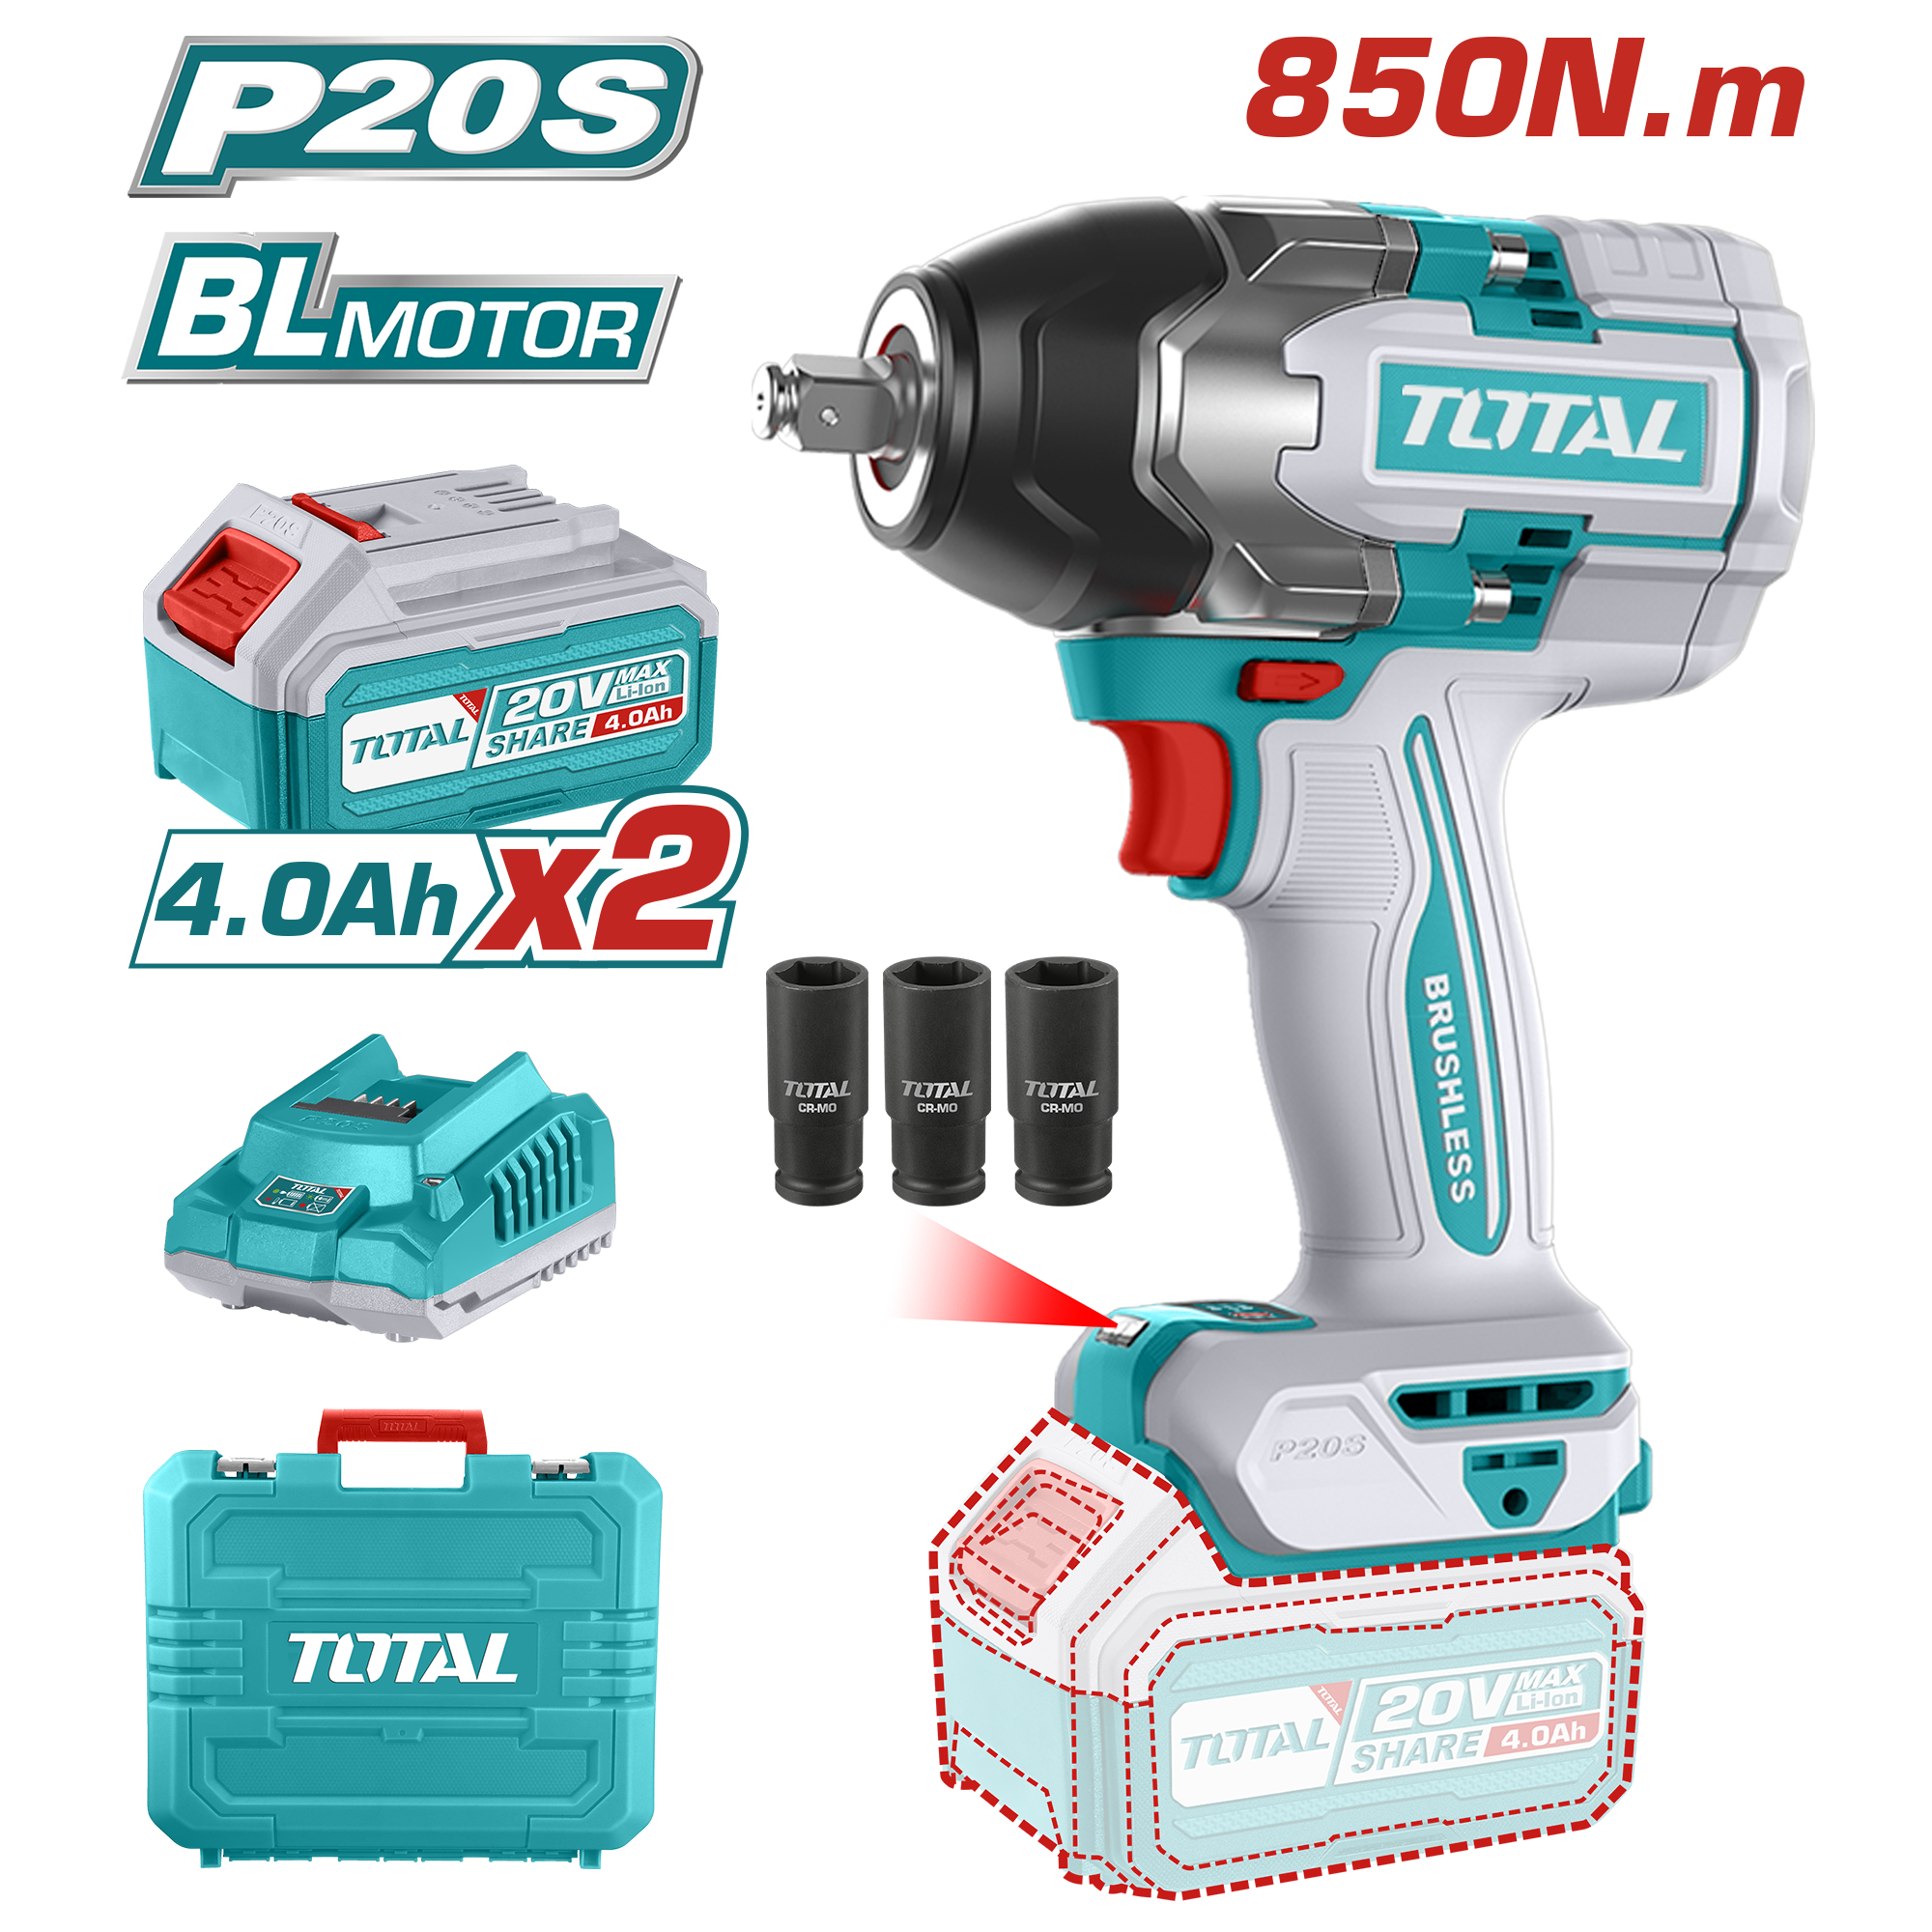 LITHIUM ION BRUSHLESS IMPACT WRENCH 1/2 INCH 850 NM WITH 2 BATTERIES 4 AMP AND CHARGER